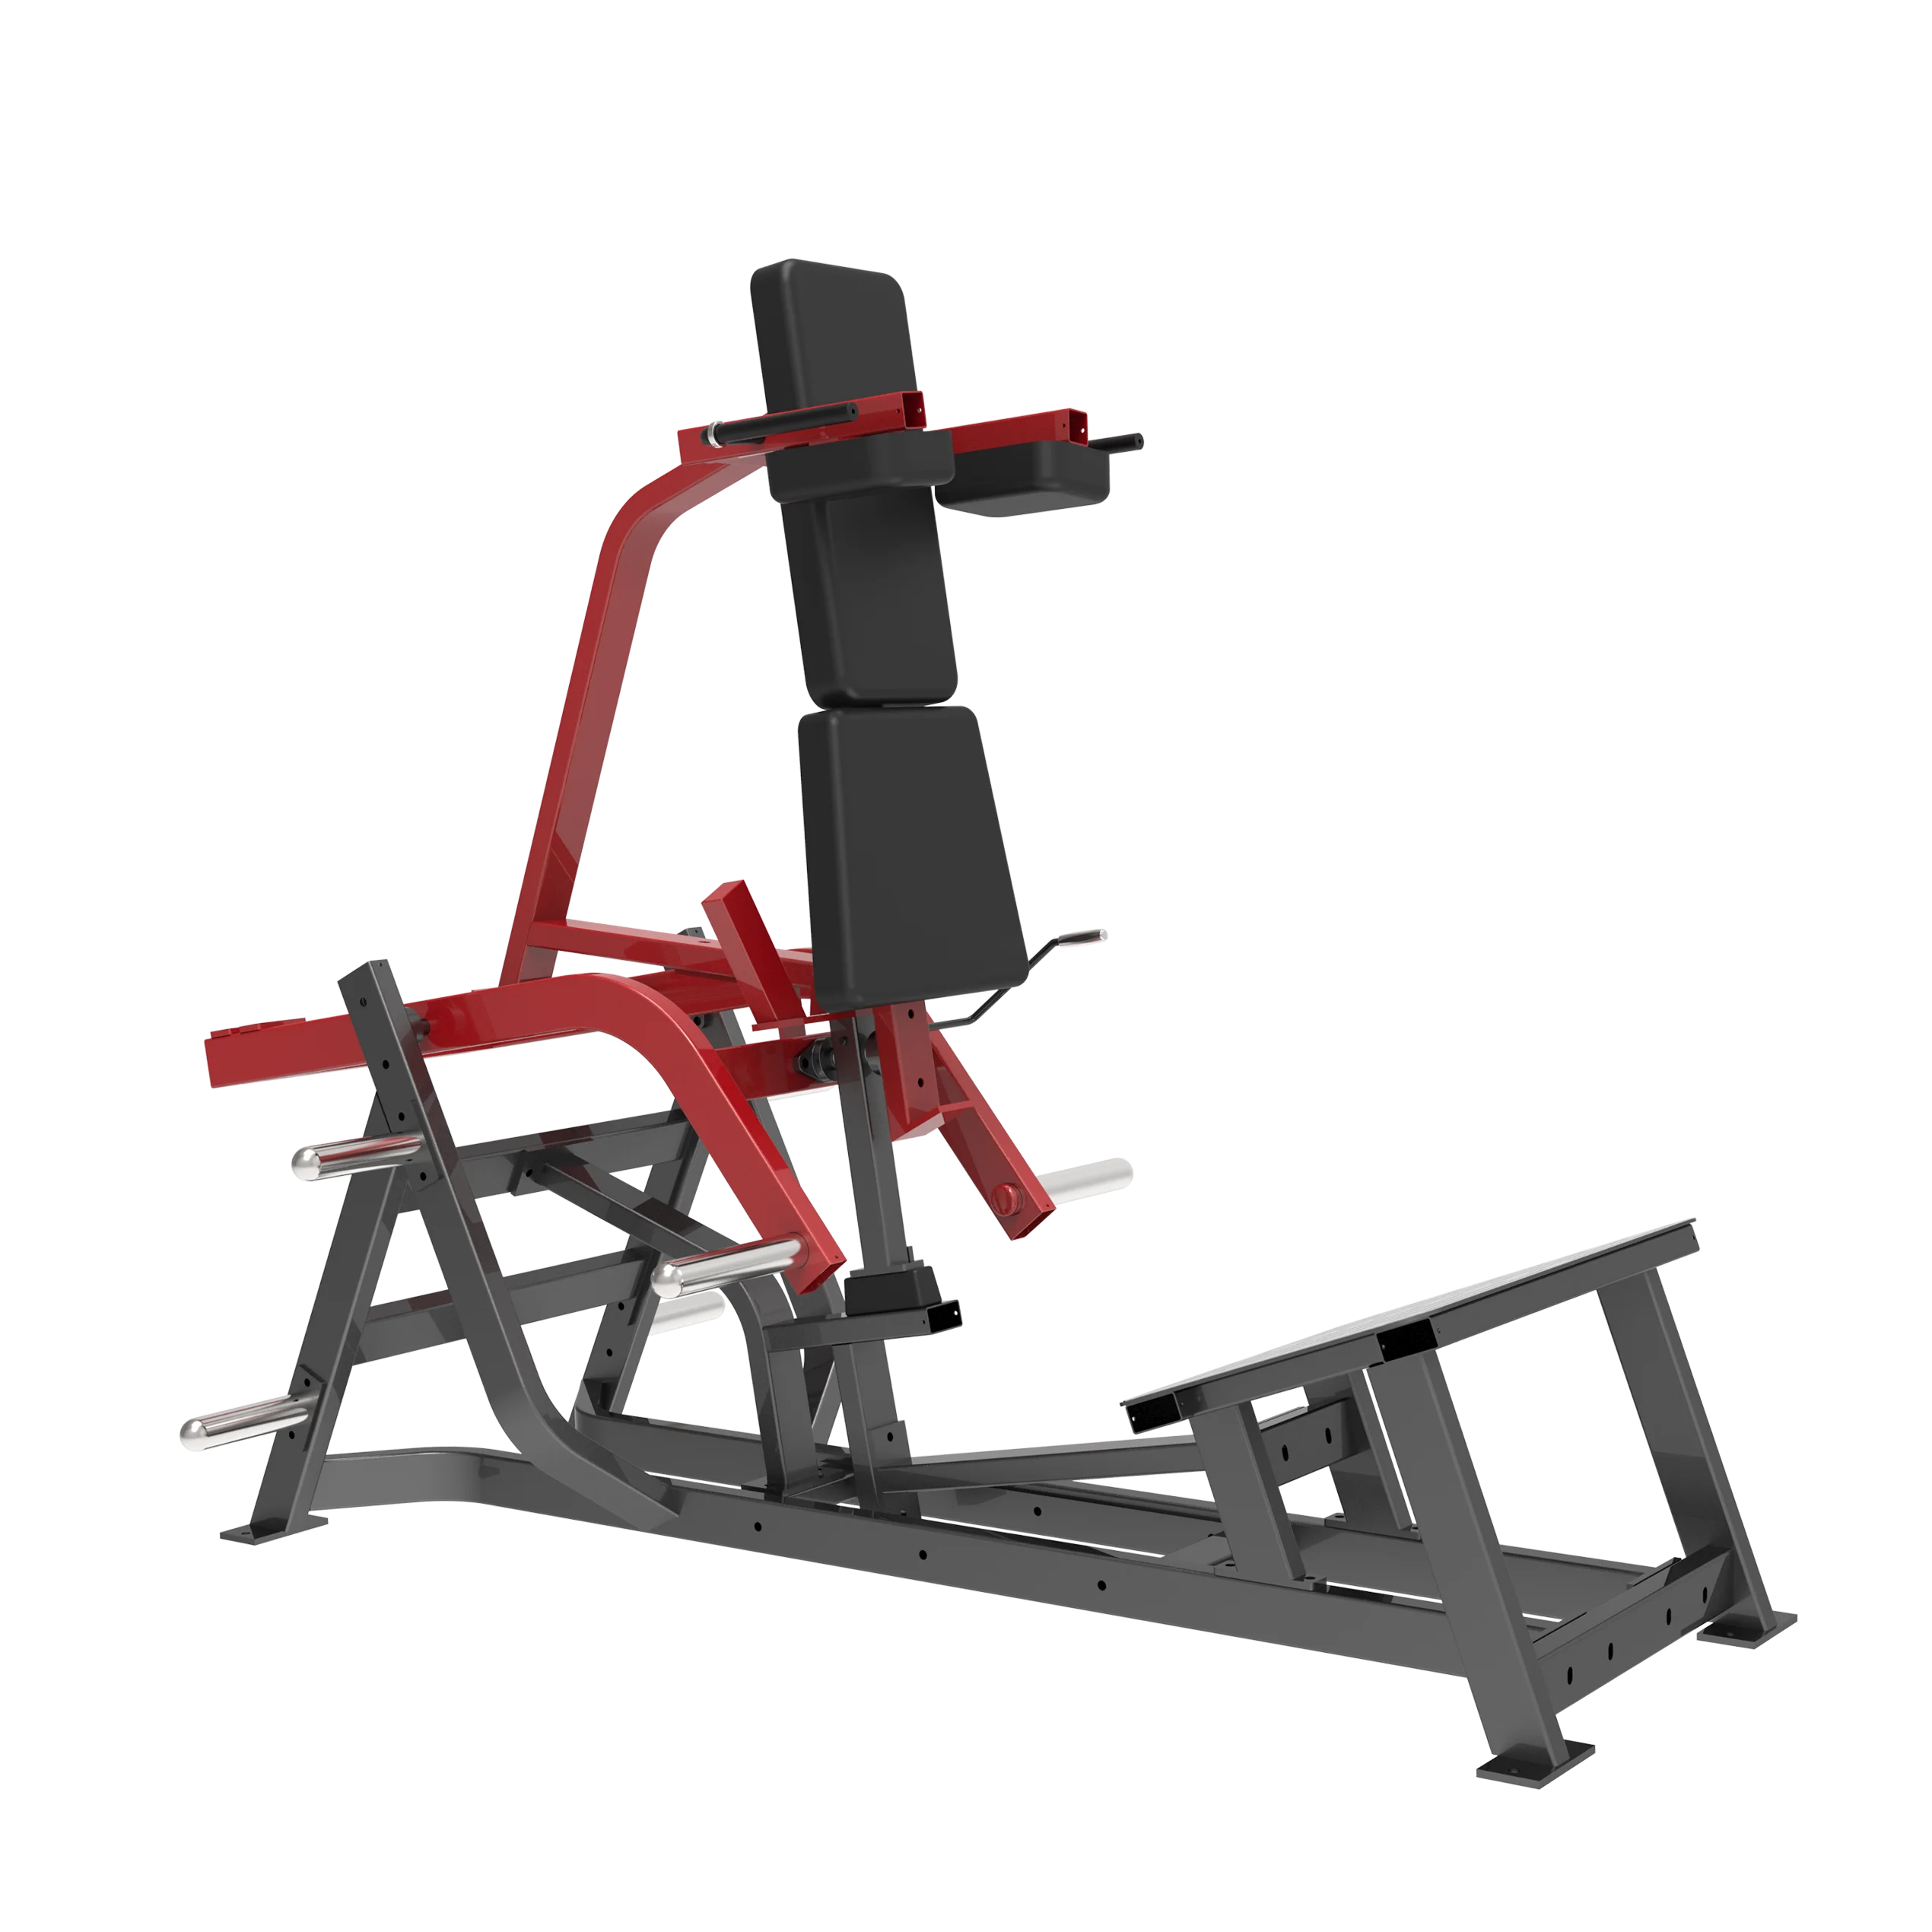 Hammer Strength Gym Equipment Plate Loaded Abductor Machine, View ...